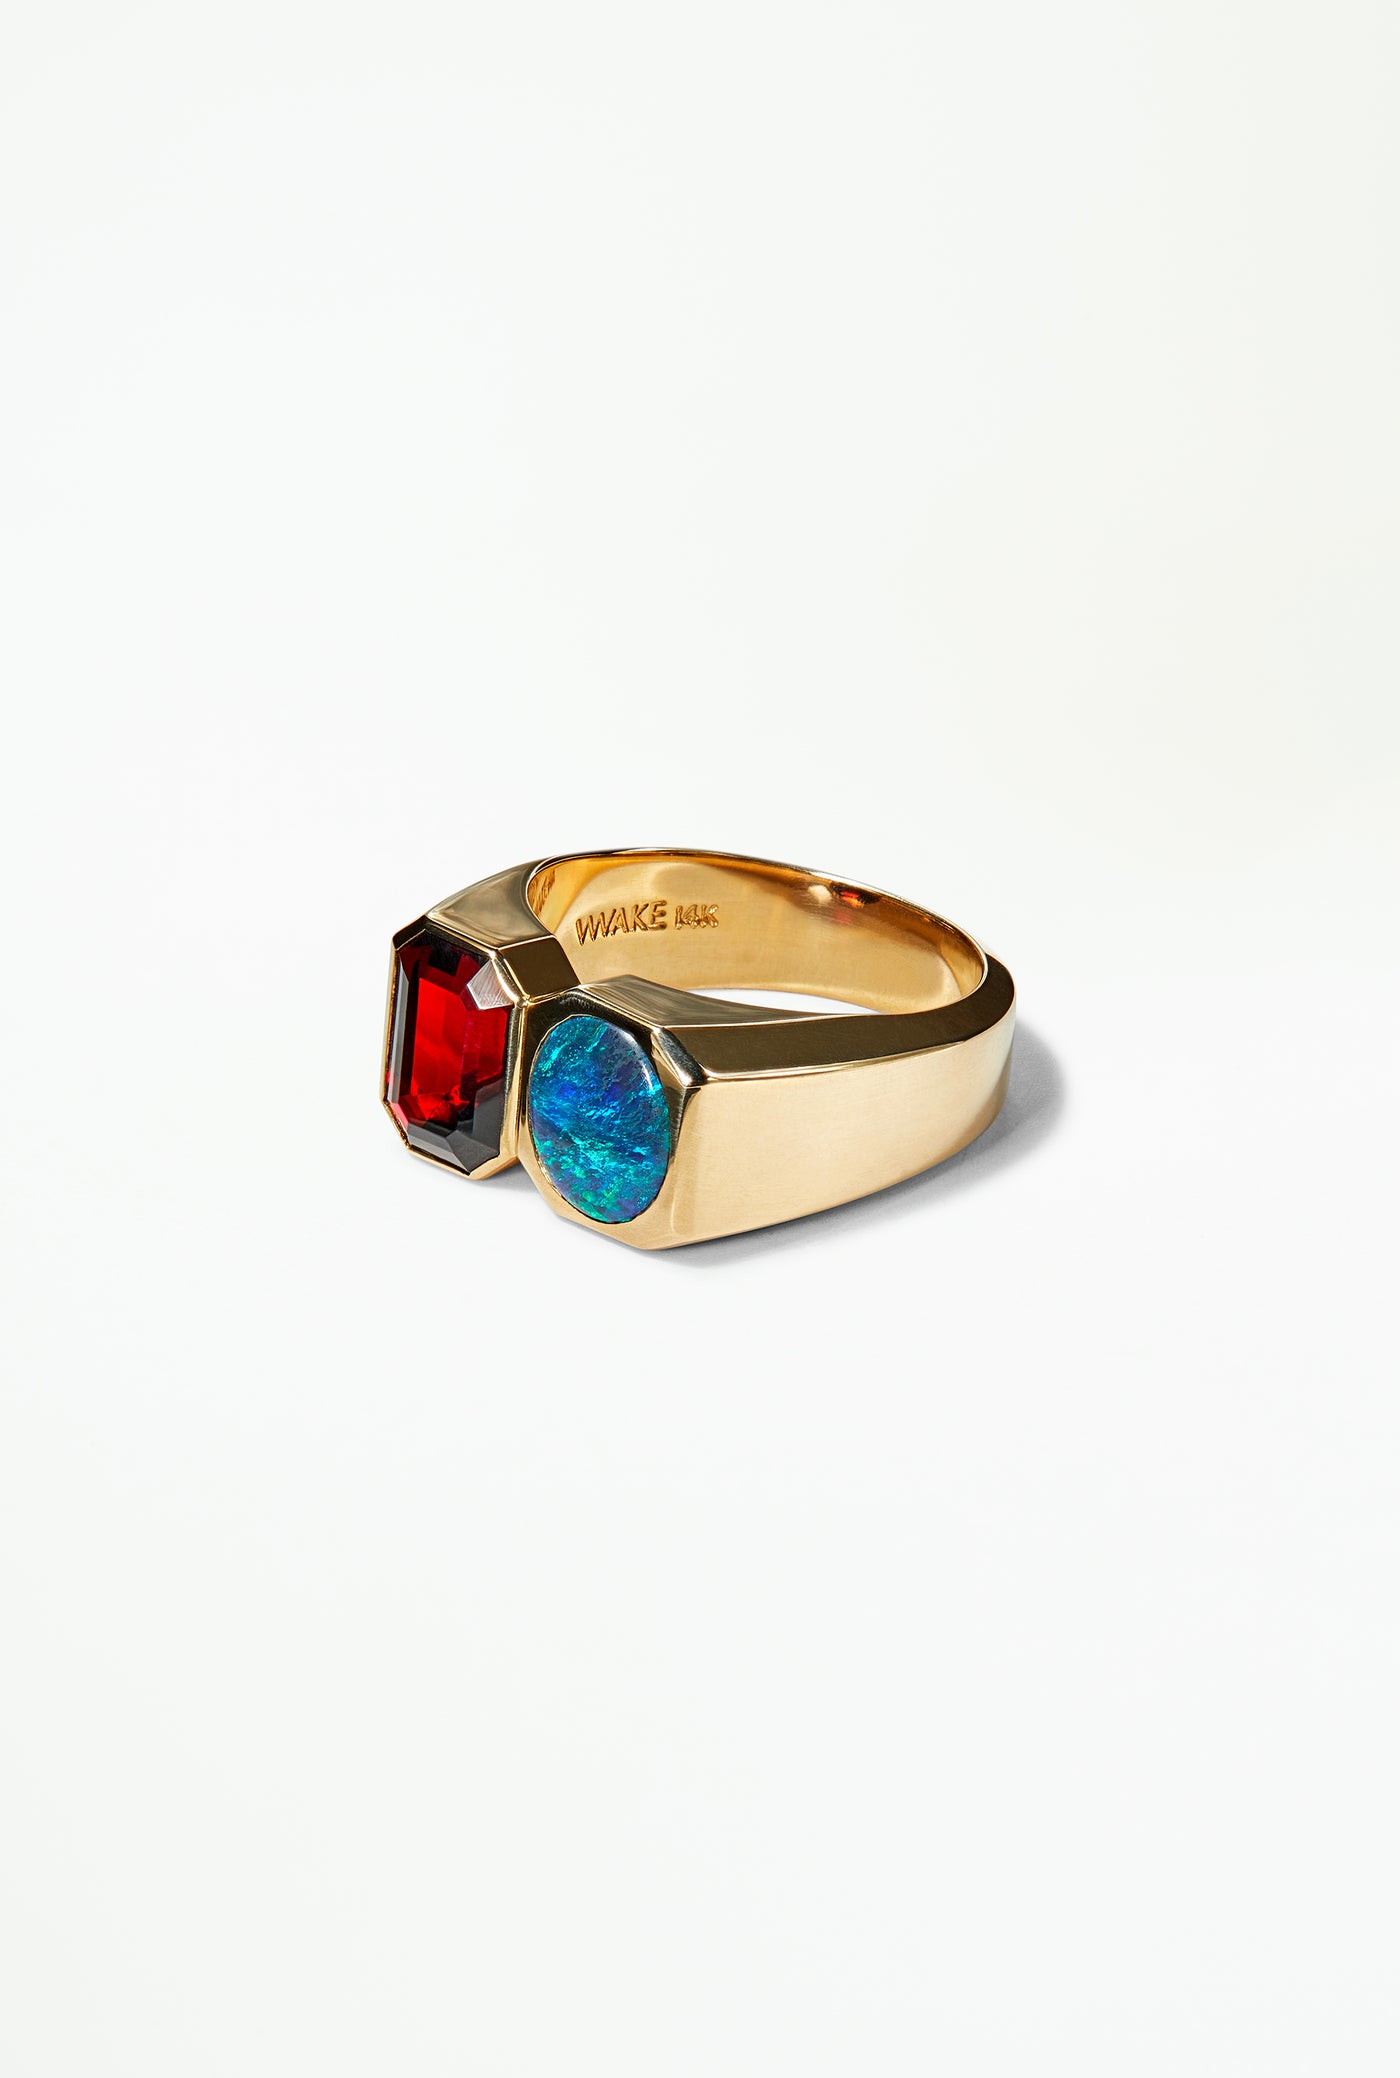 One of a Kind Dyad Signet Ring No. 5